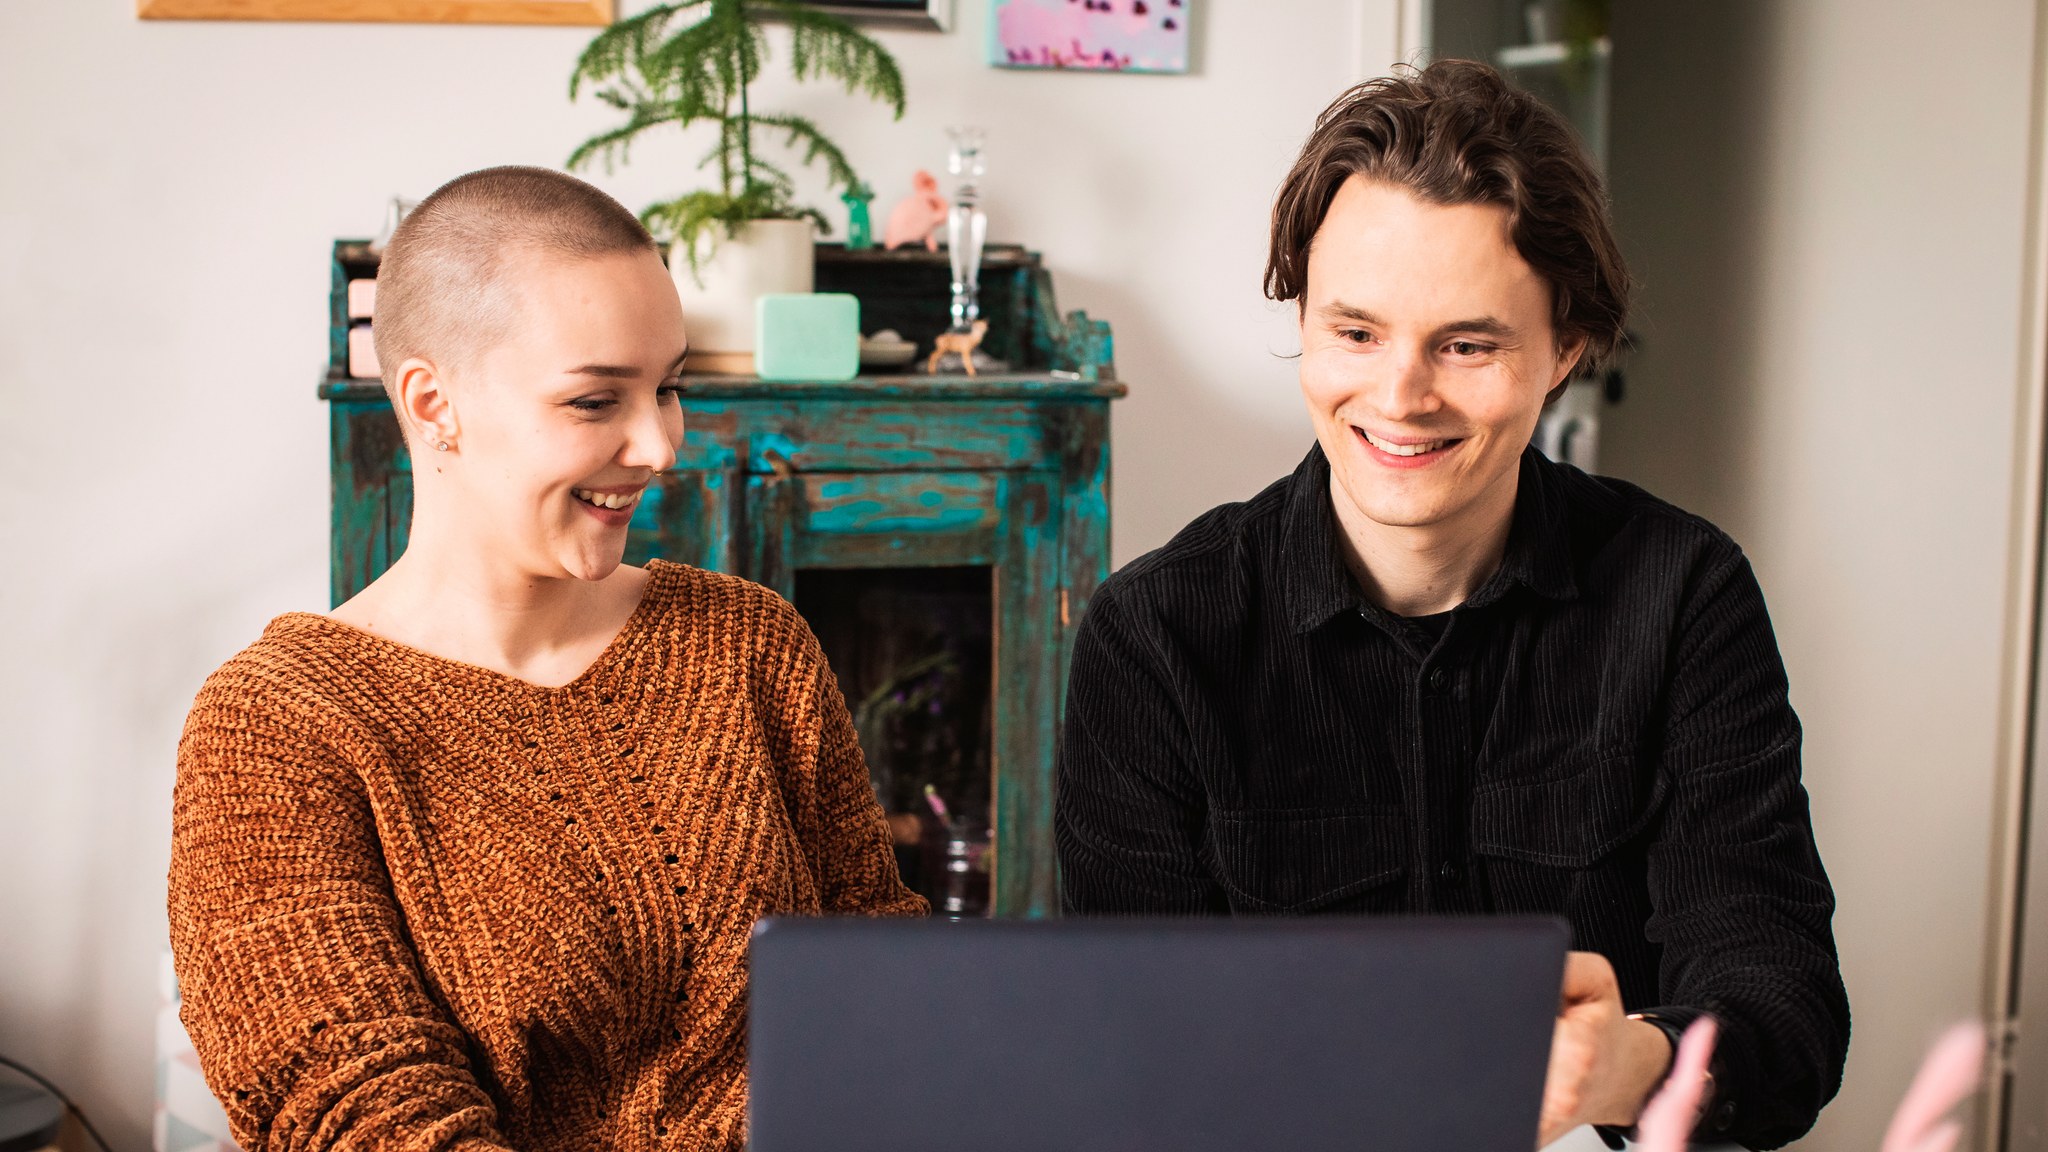 A young woman and man are looking at a laptop and smiling.